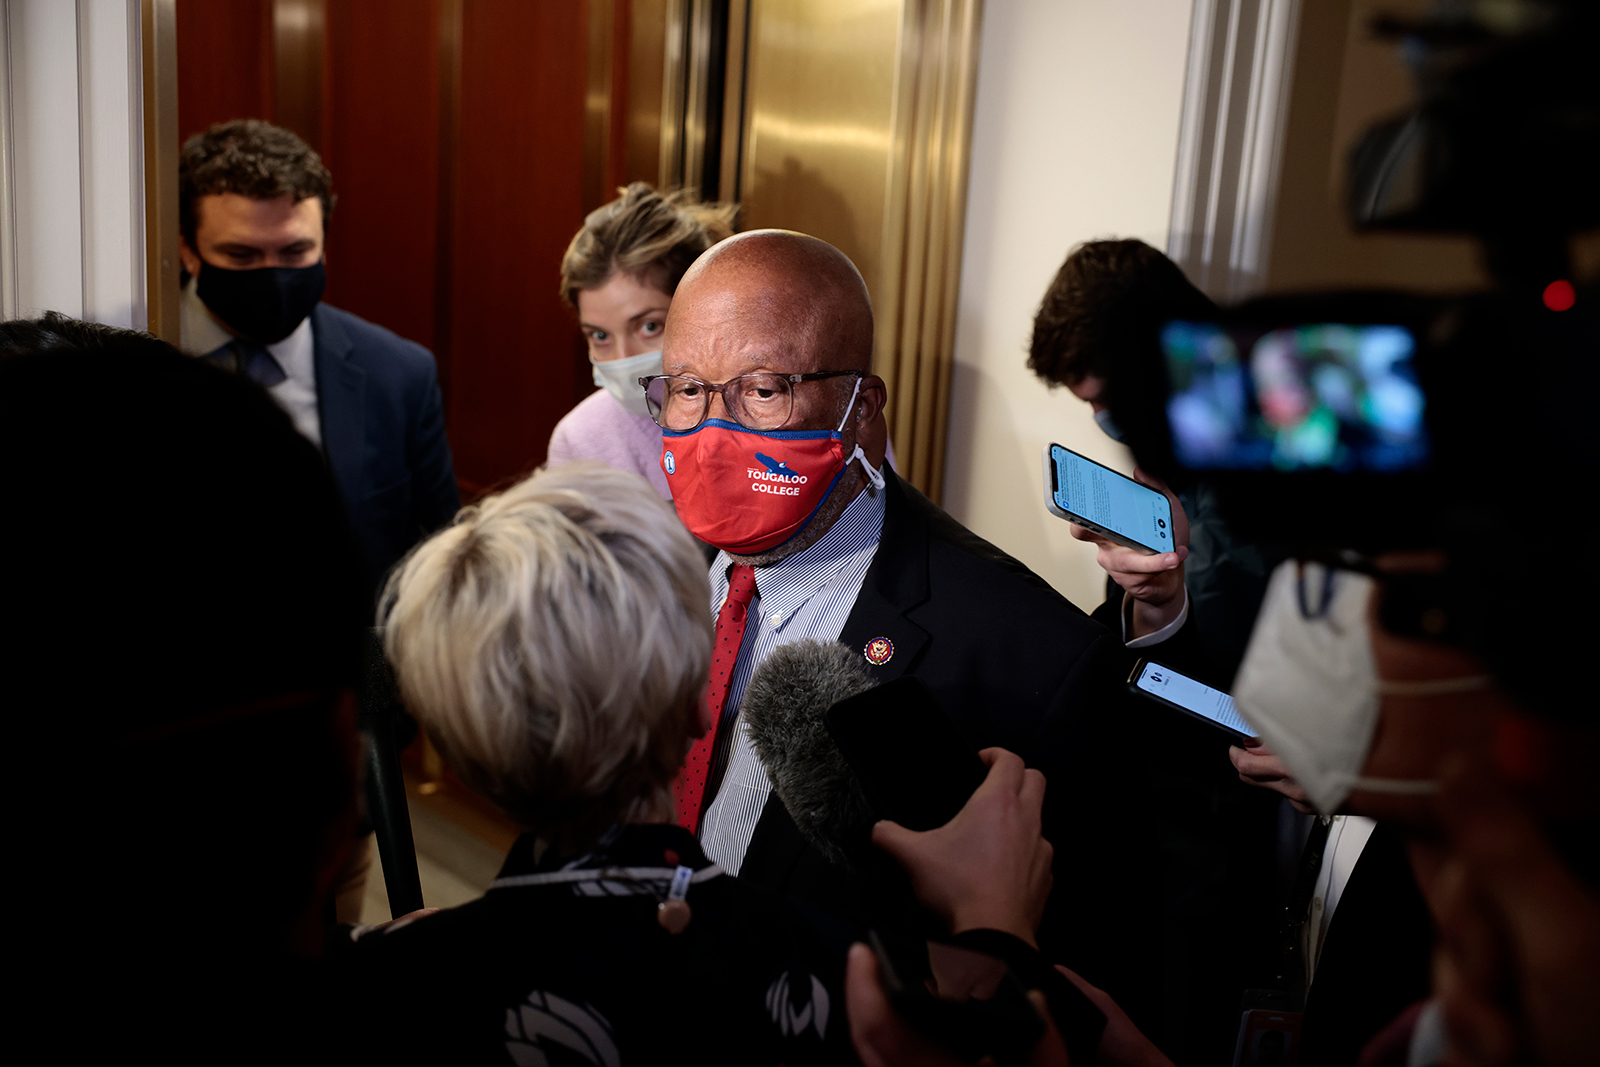 Rep. Bennie Thompson, chair of the select committee investigating the January 6 attack, speaks to reporters after the conclusion of a business meeting on Capitol Hill on December 13, in Washington, DC. (Anna Moneymaker/Getty Images)